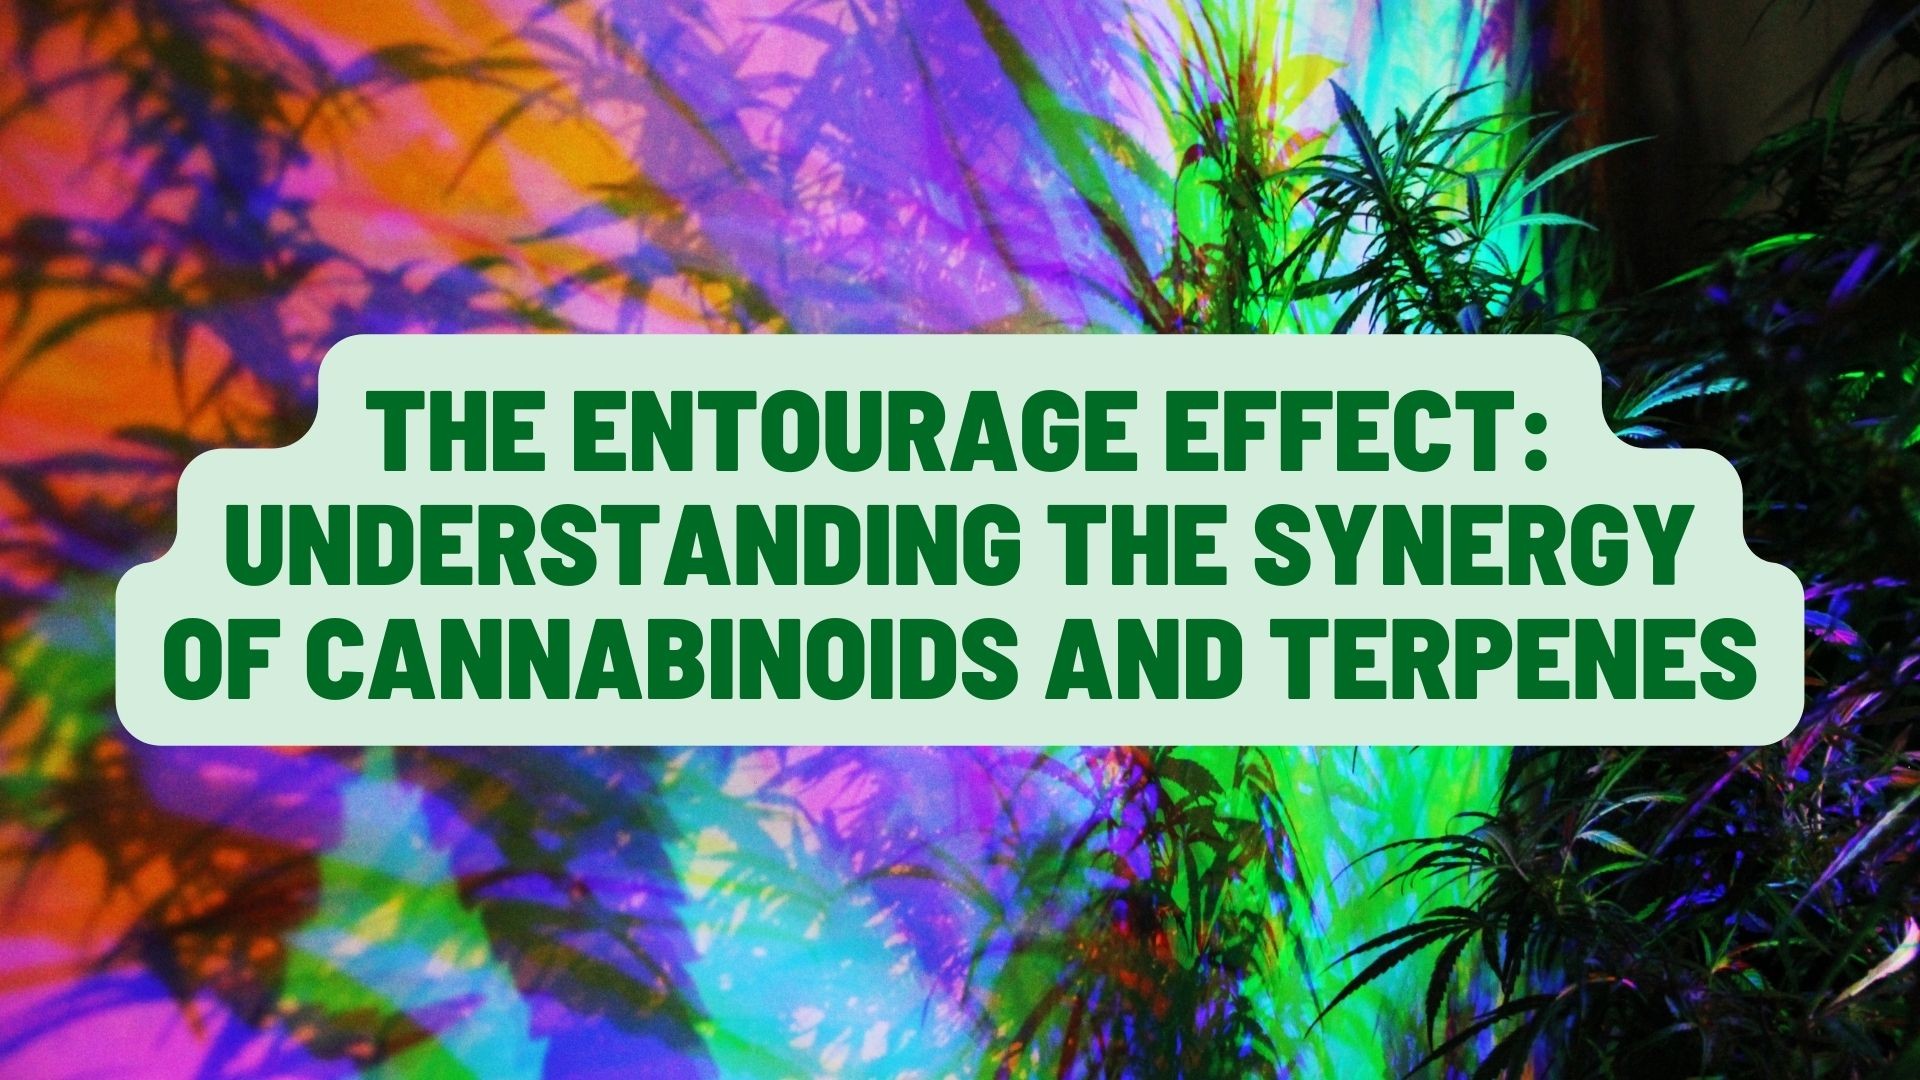 The Entourage Effect: Understanding the Synergy of Cannabinoids and Terpenes